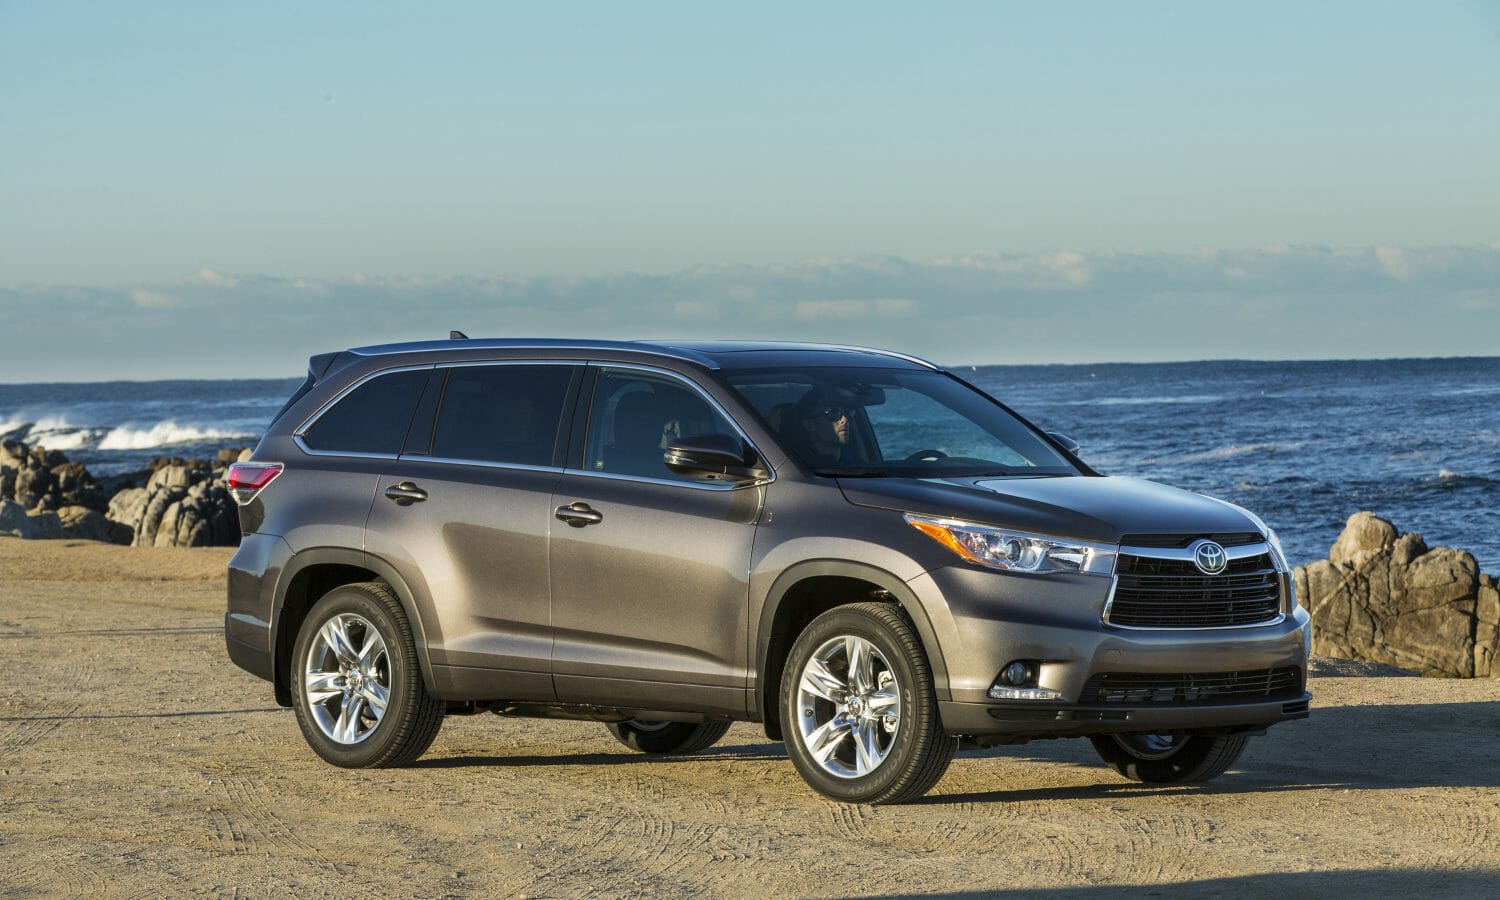 2016 Toyota Highlander Review: A Safe Dependable Midsize SUV Loaded With Technology